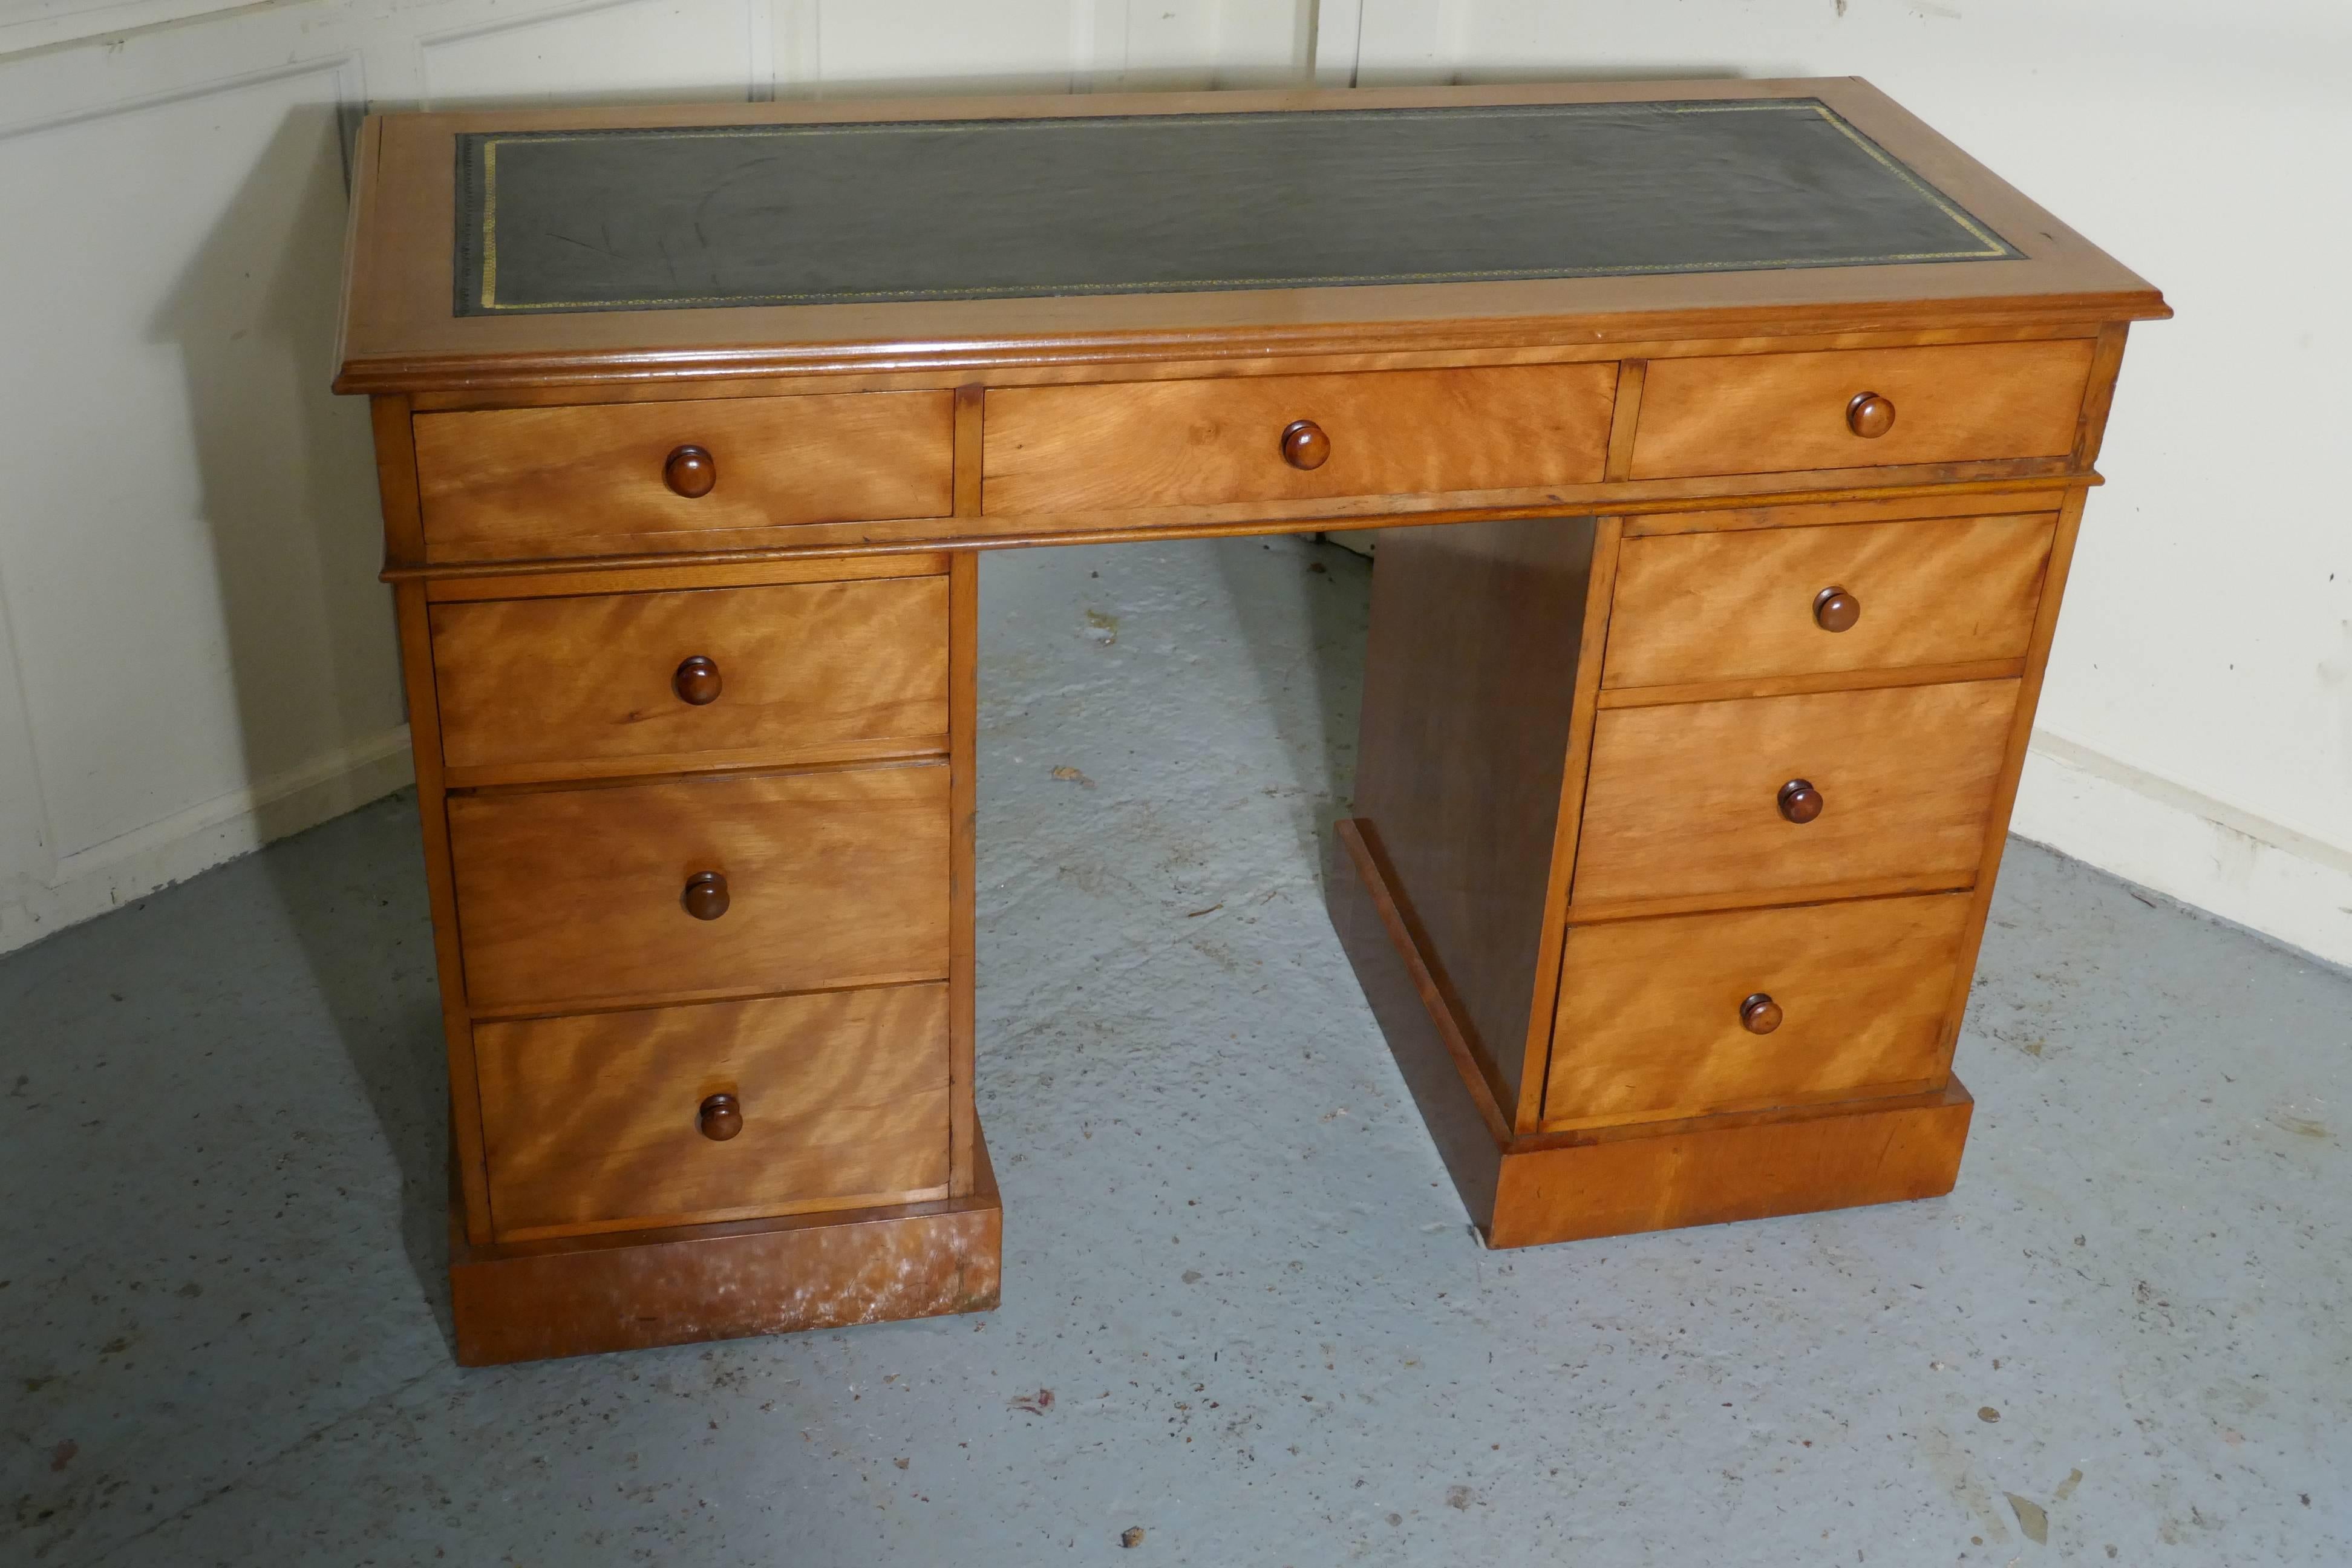 A Victorian birch pedestal desk 

The desk is made in one of the loveliest woods, birch which is similar to Mahogany apart from the wonderful golden color, each of the pedestals has three graduated drawers and the top section also has three